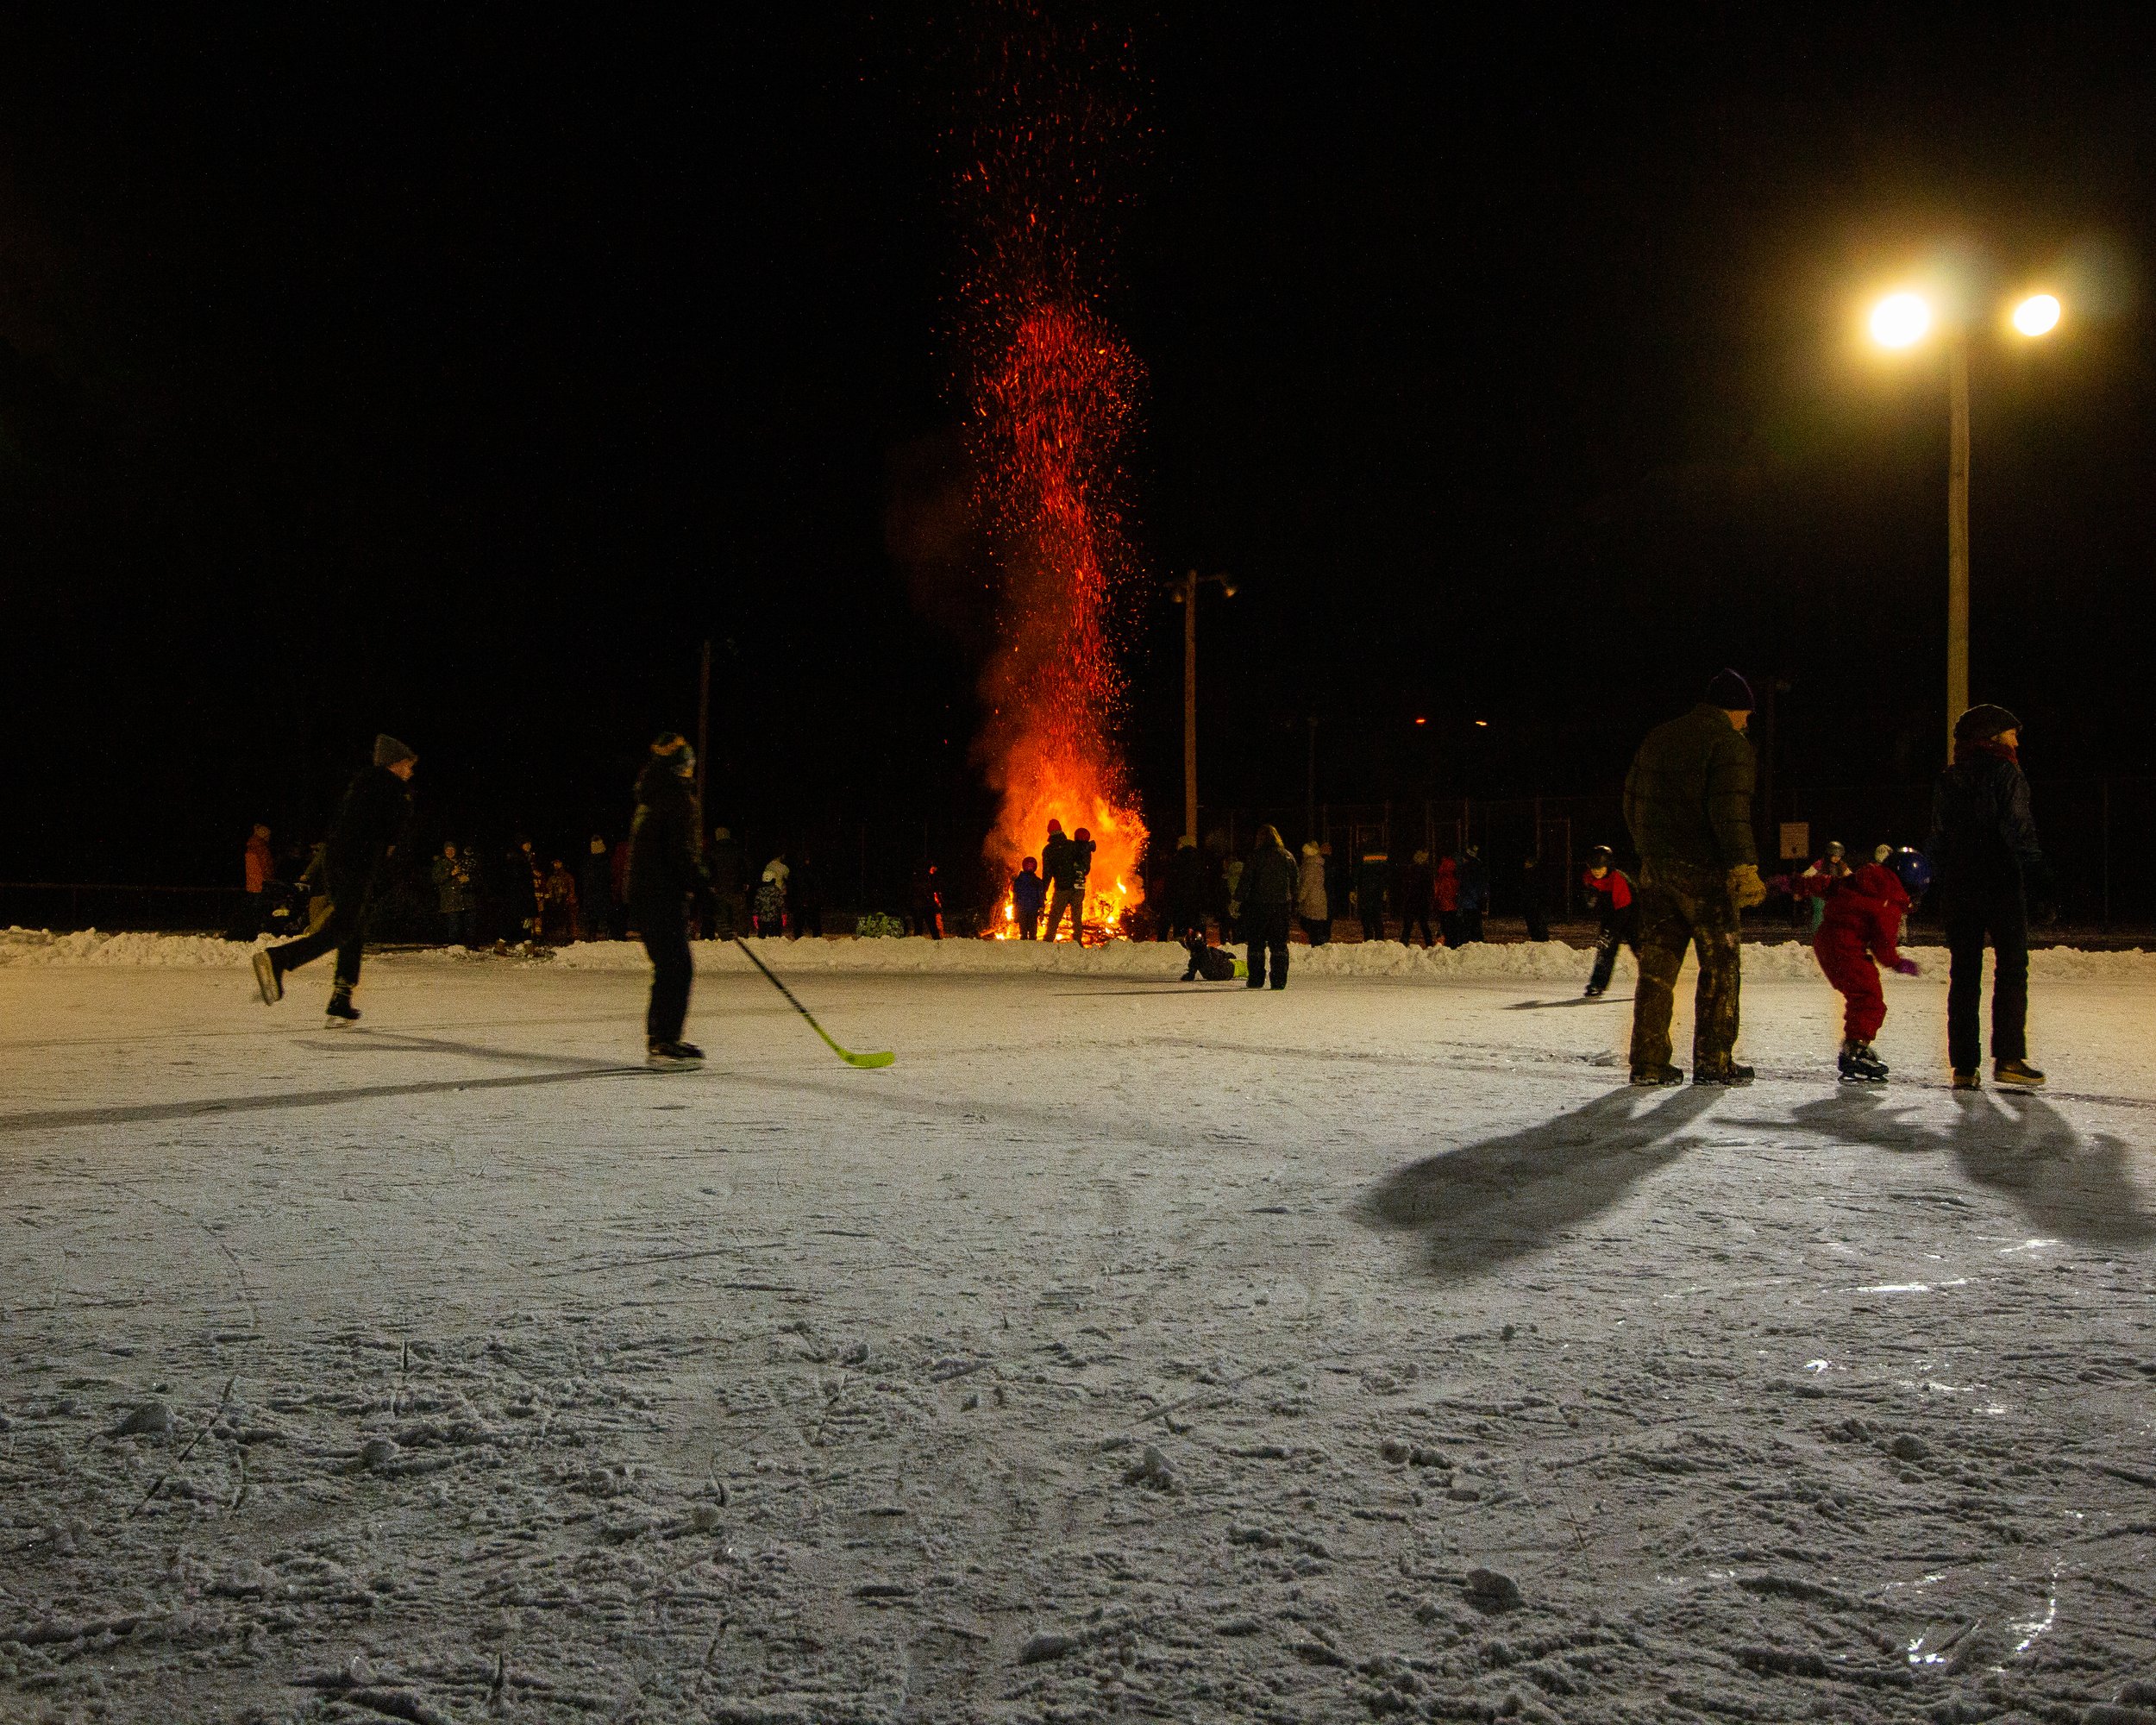  The bonfire is a nice contrast to the outdoor ice rink recently opened at Anderson field. Photo by Tyler Keefe 